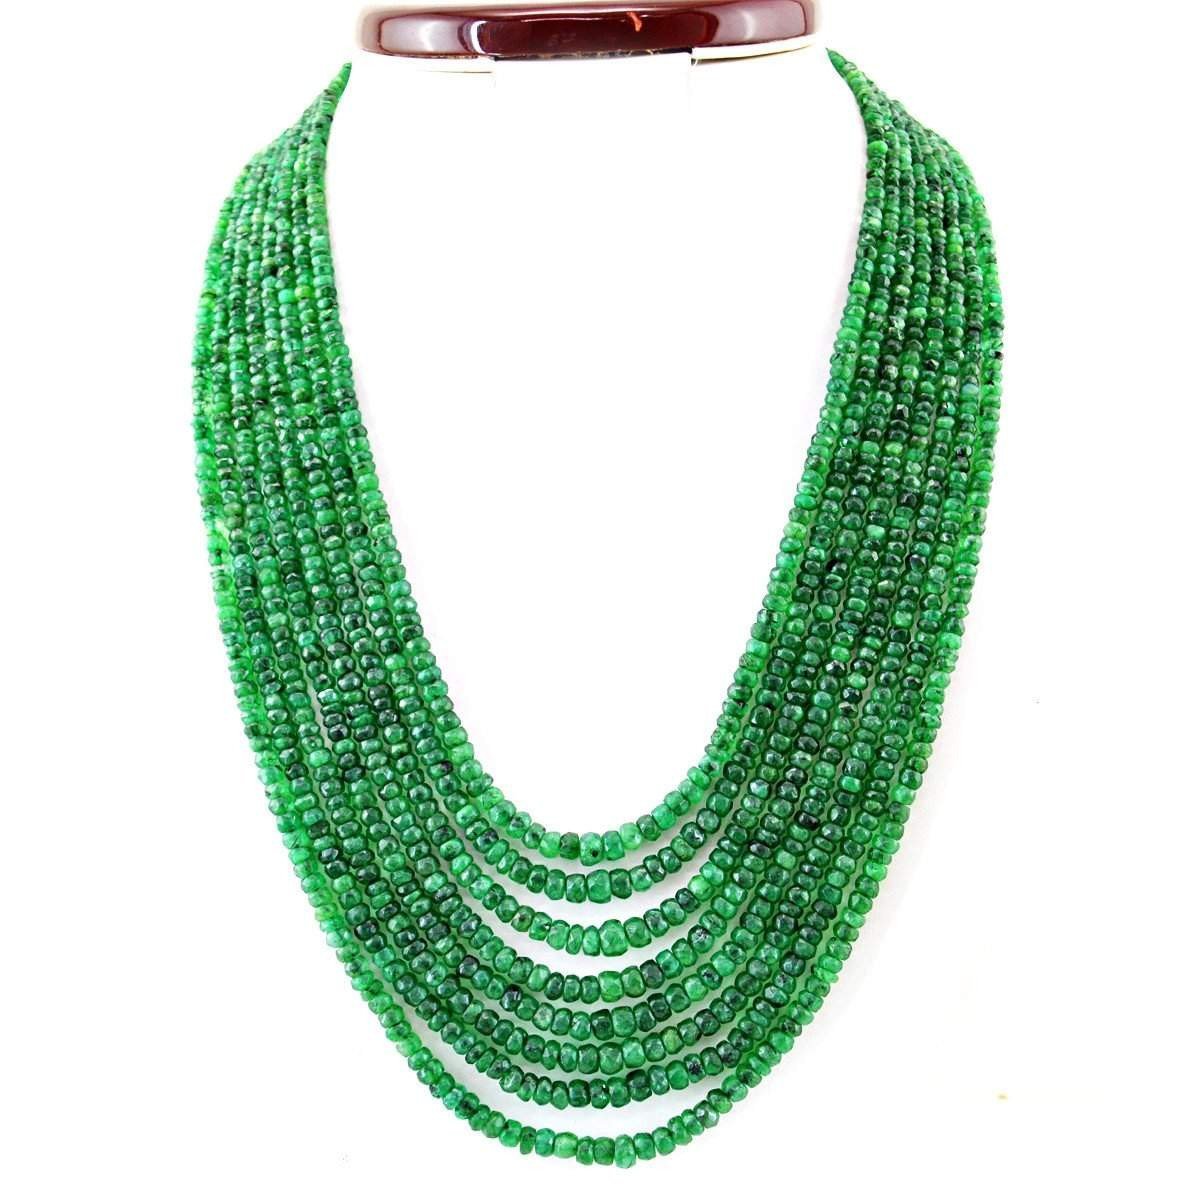 gemsmore:Untreated Green Emerald Necklace Natural 8 Line Round Cut Beads